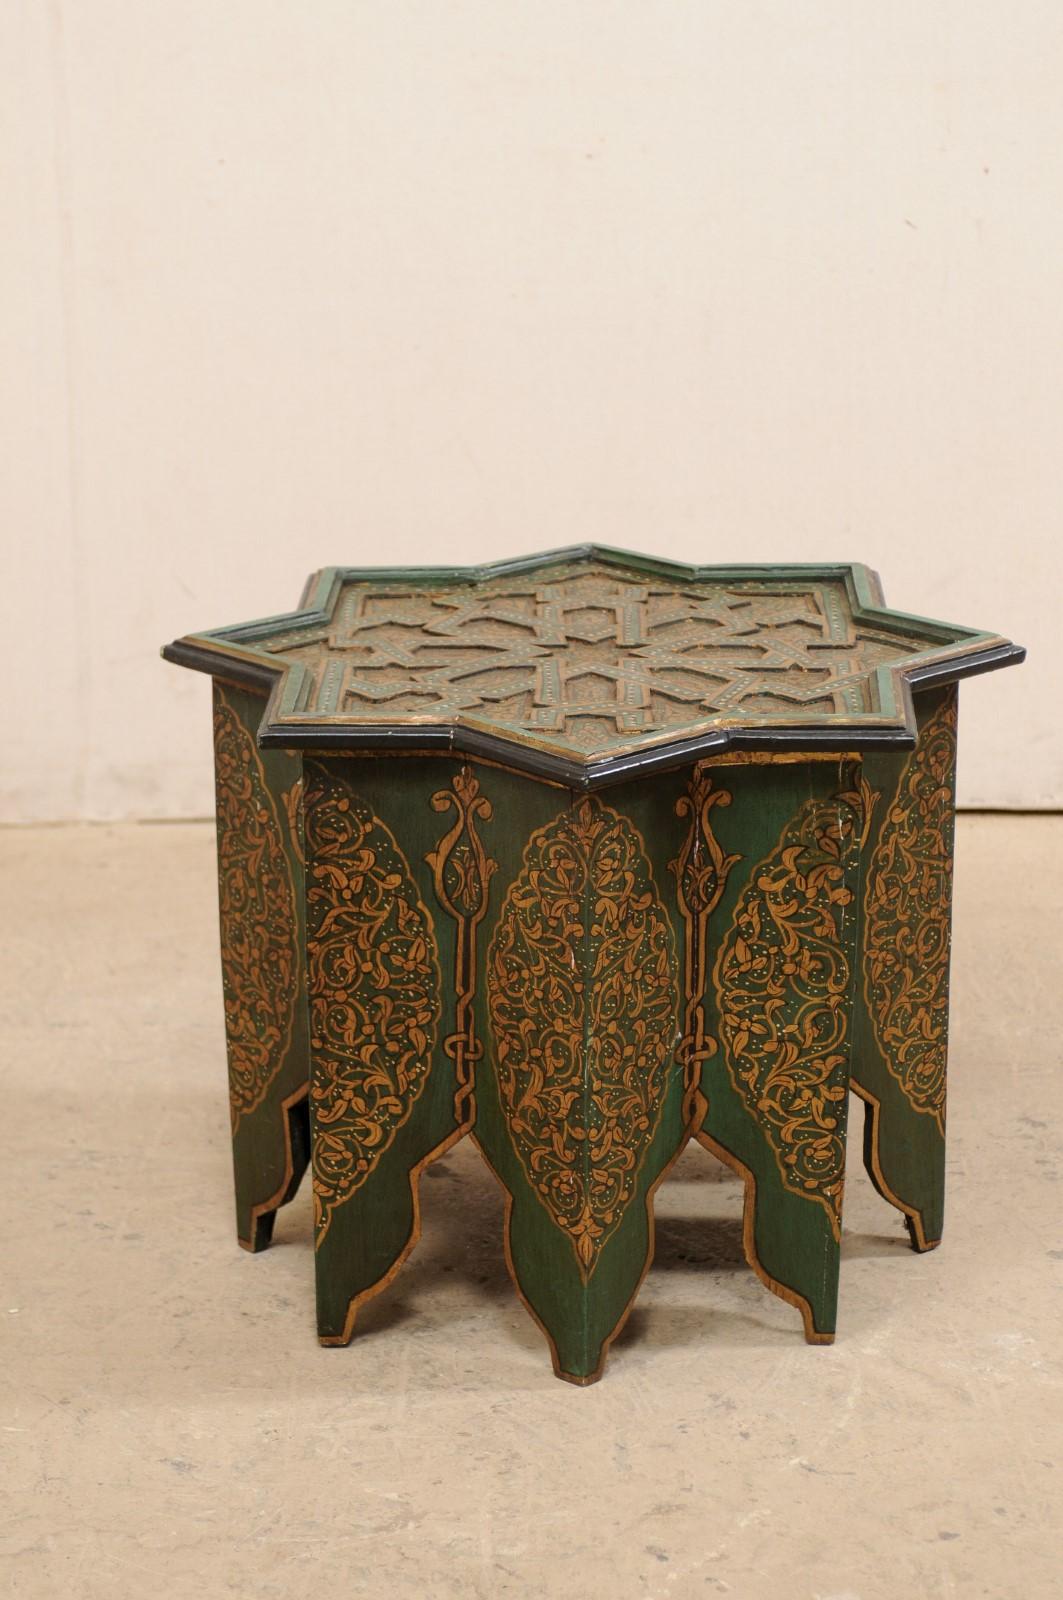 Wood Moroccan Morrish Star Shaped Tea or Side Table, in Green, Black and Gold